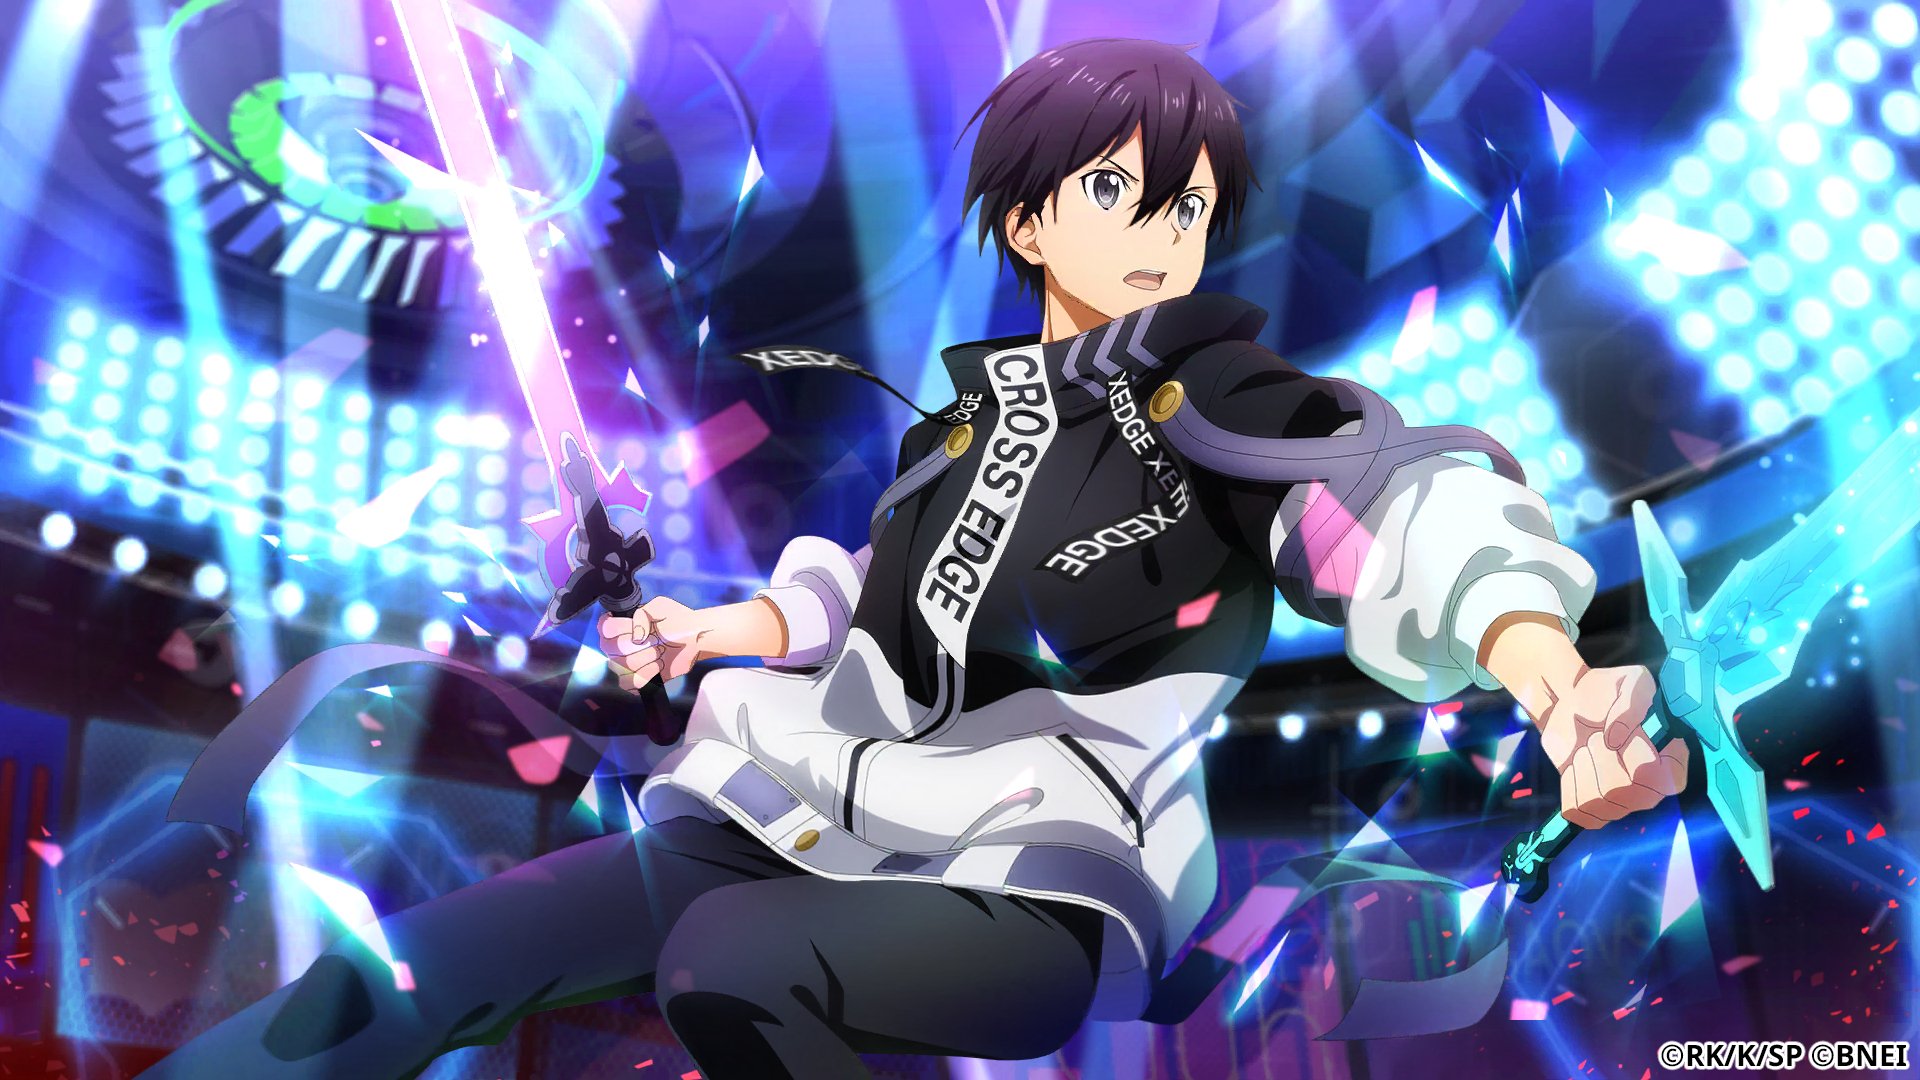 Sword Art Online Variant Showdown on X: January's calendar is Kirito📅  Wishing all our players a great year in 2023! #SAOVS #SAO   / X